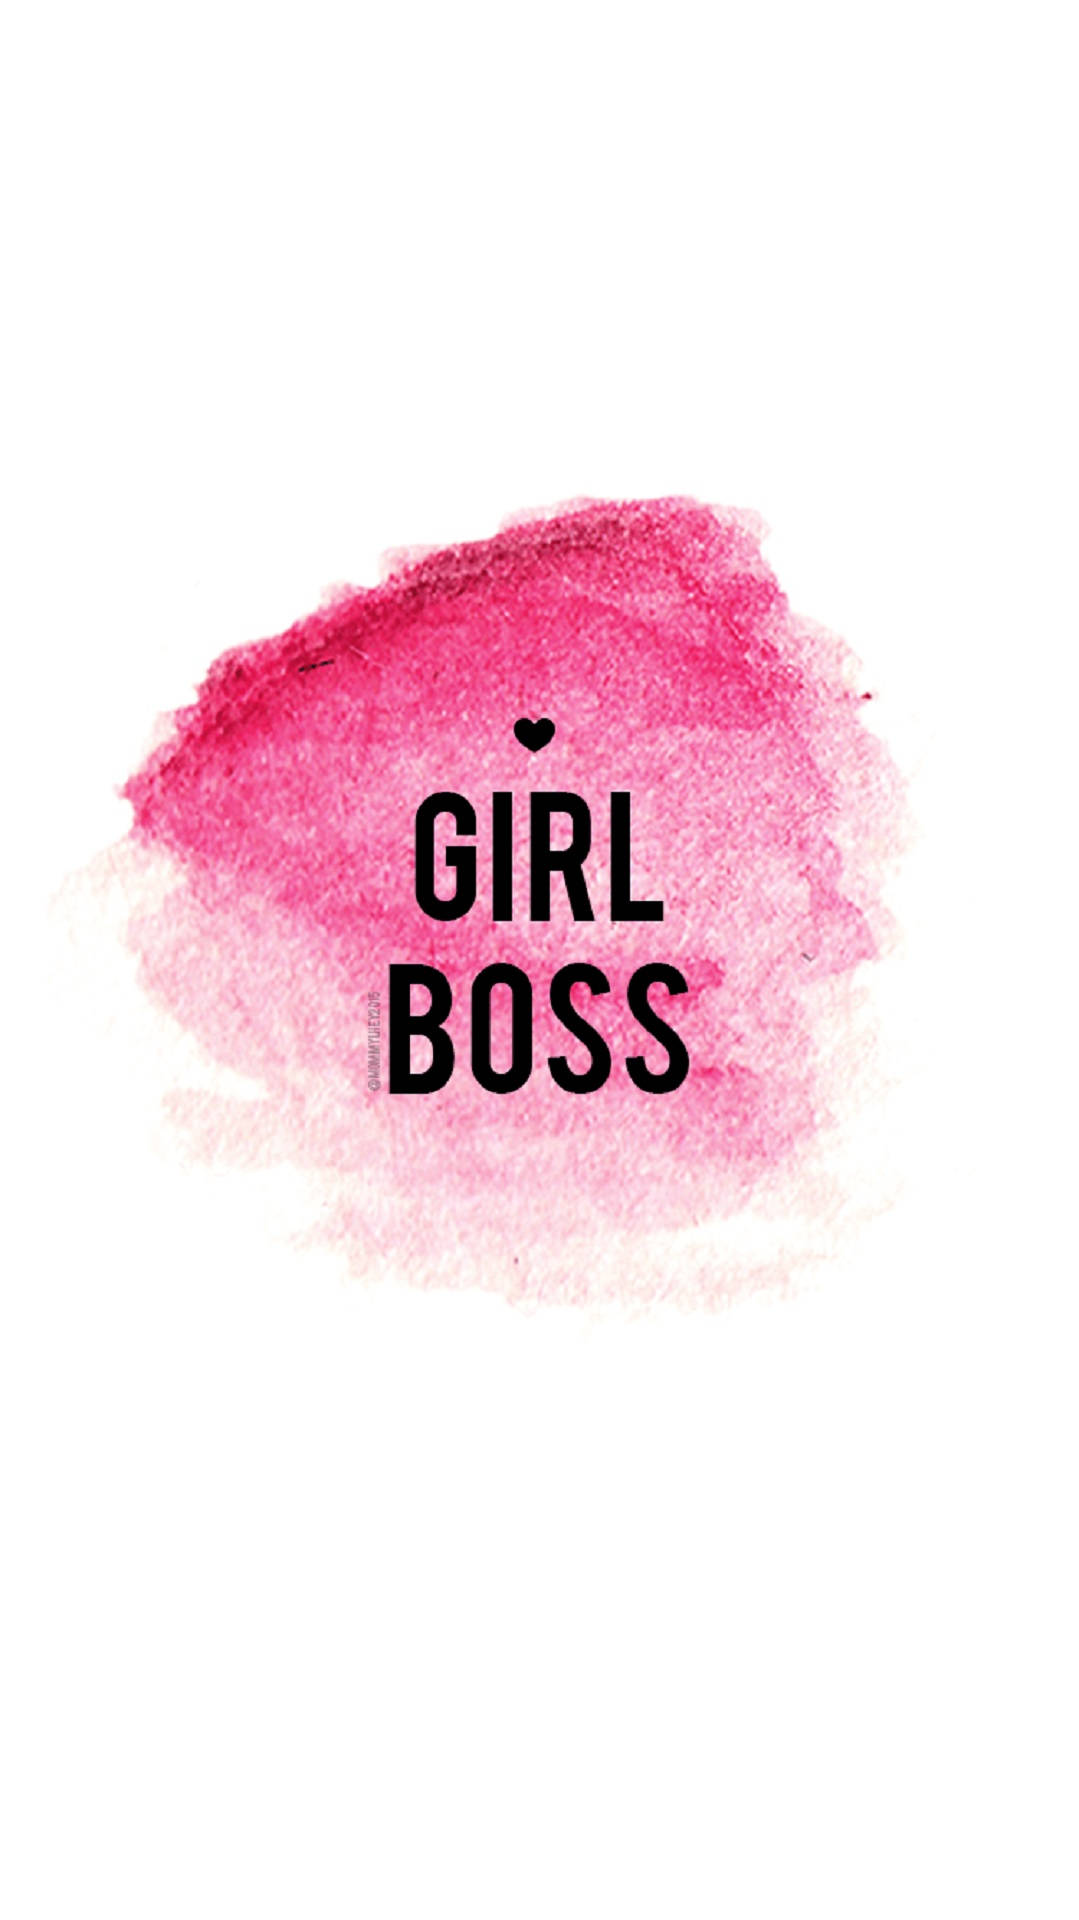 Girl Boss With Pink Lipstick Shade